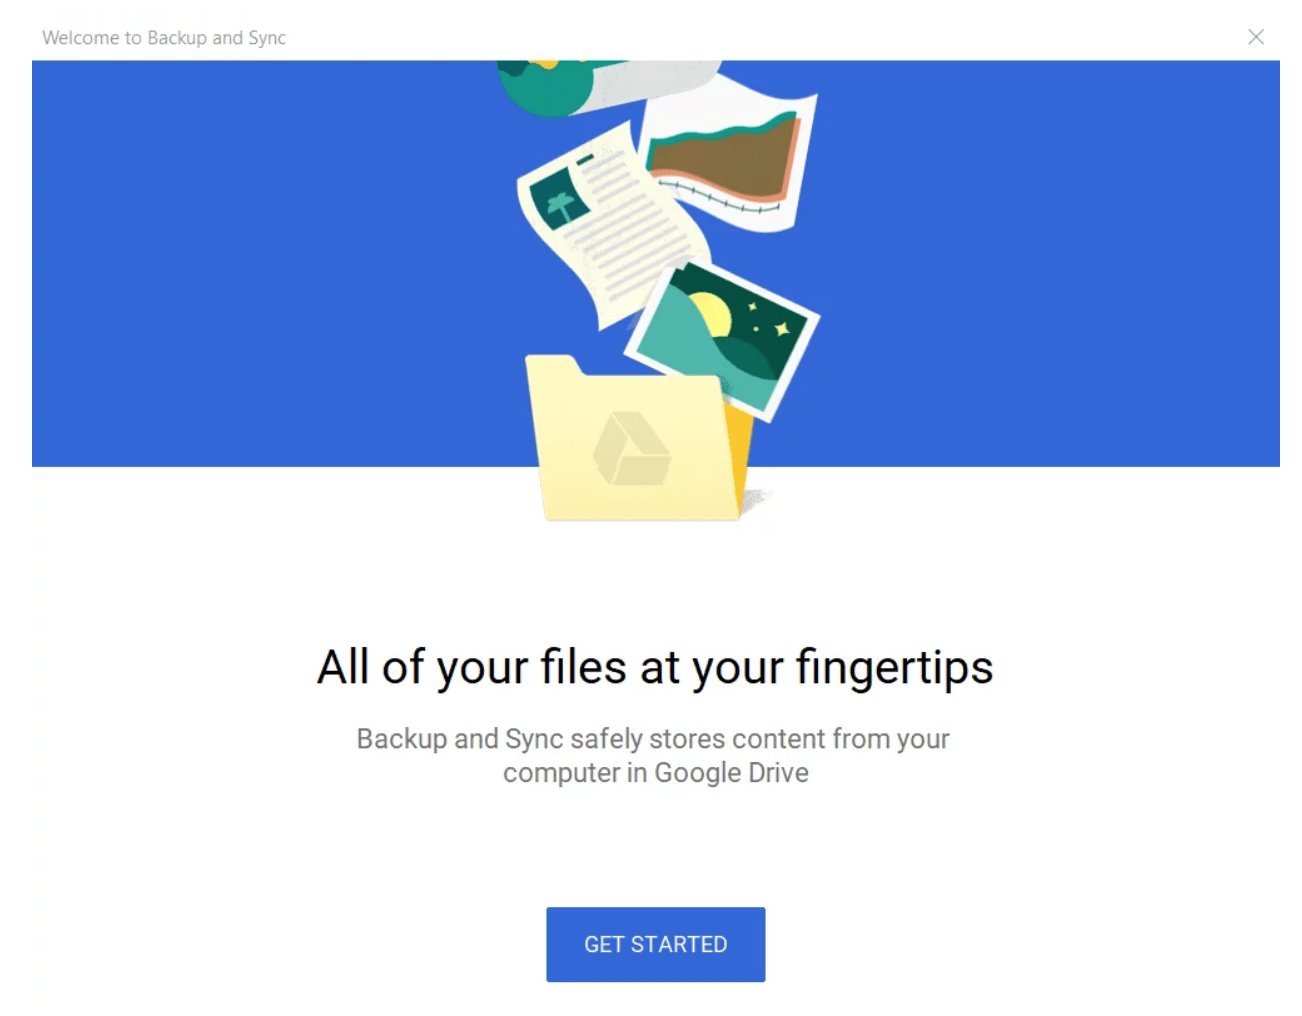 Backup and Sync is an application developed by Google that allows users to synchronize files and folders from their computer to Google Drive.